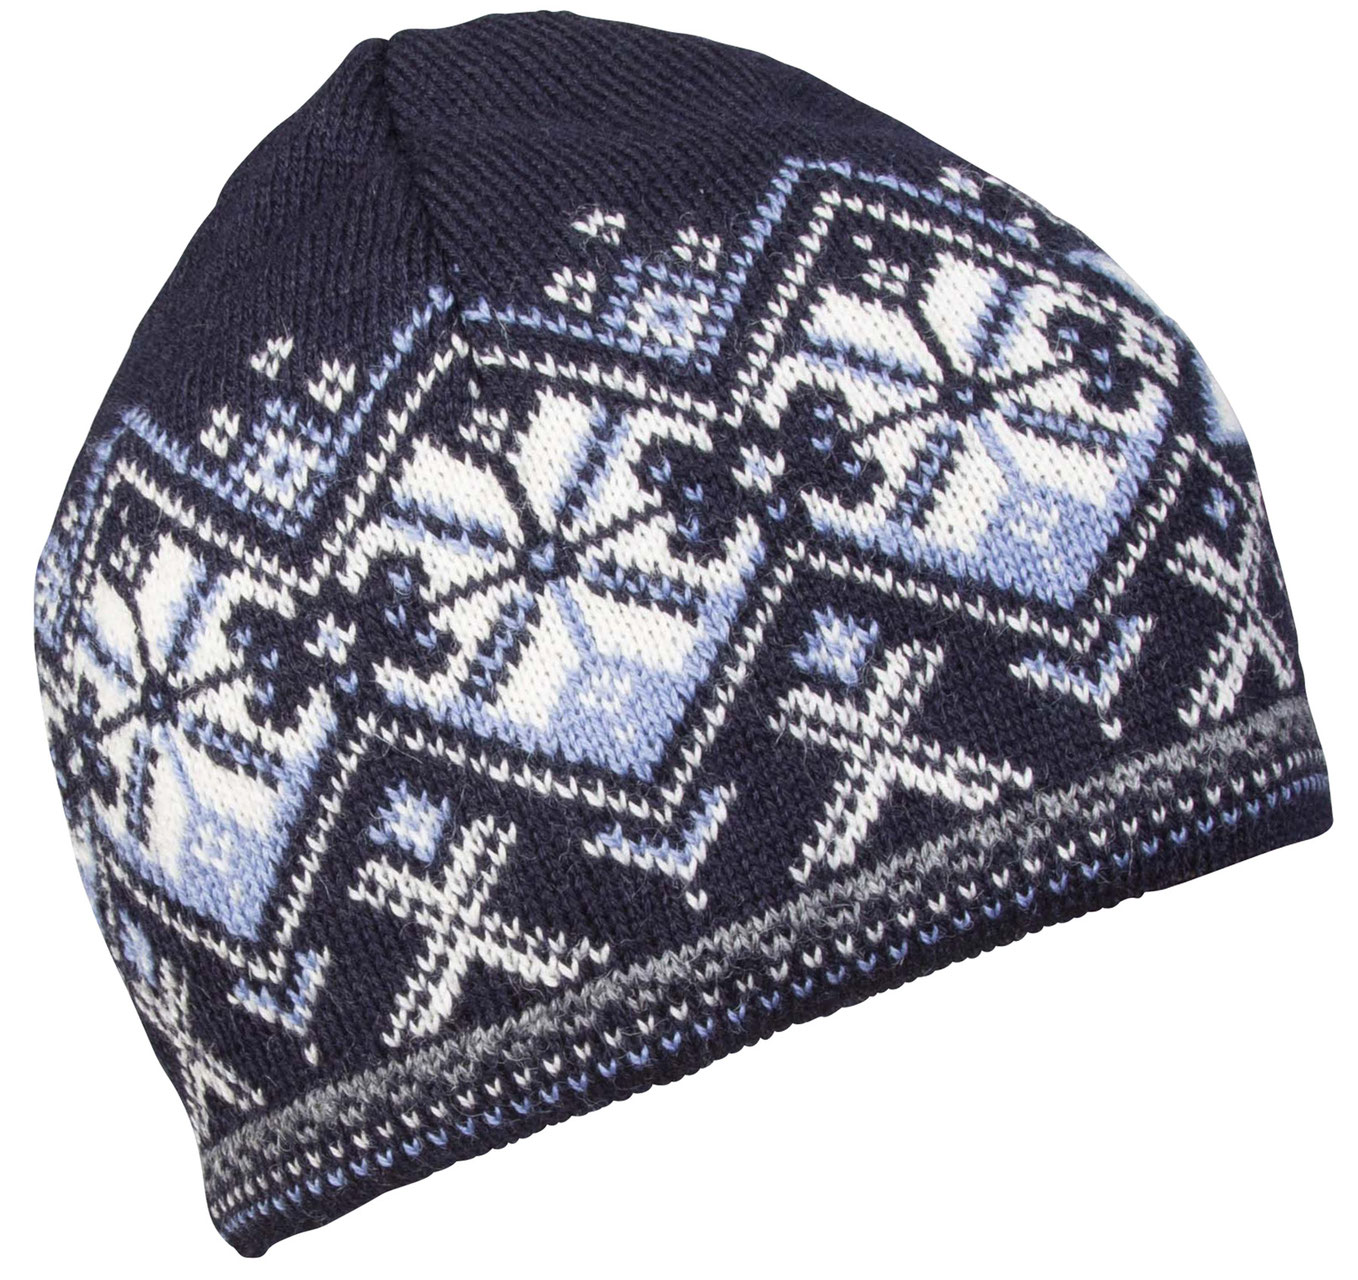 Dale of Norway Geiranger Hat - Sweater Chalet